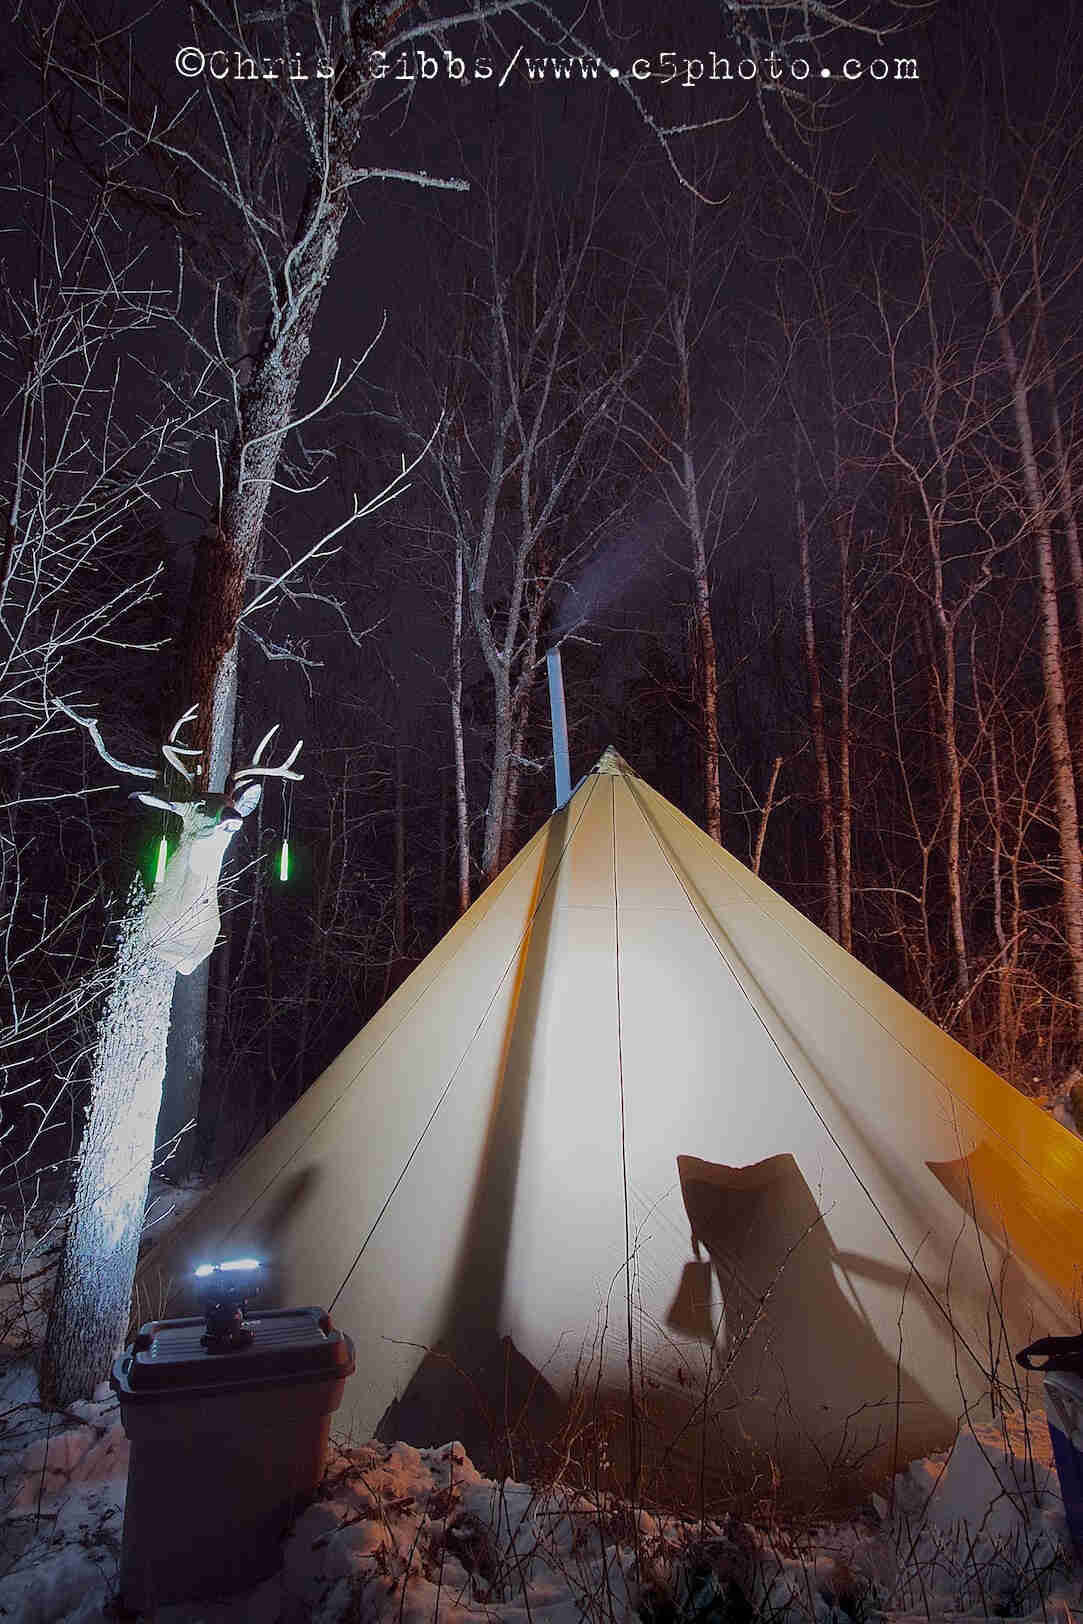 A teepee tent, lit up from the inside, on a snowy campsite in the woods at night